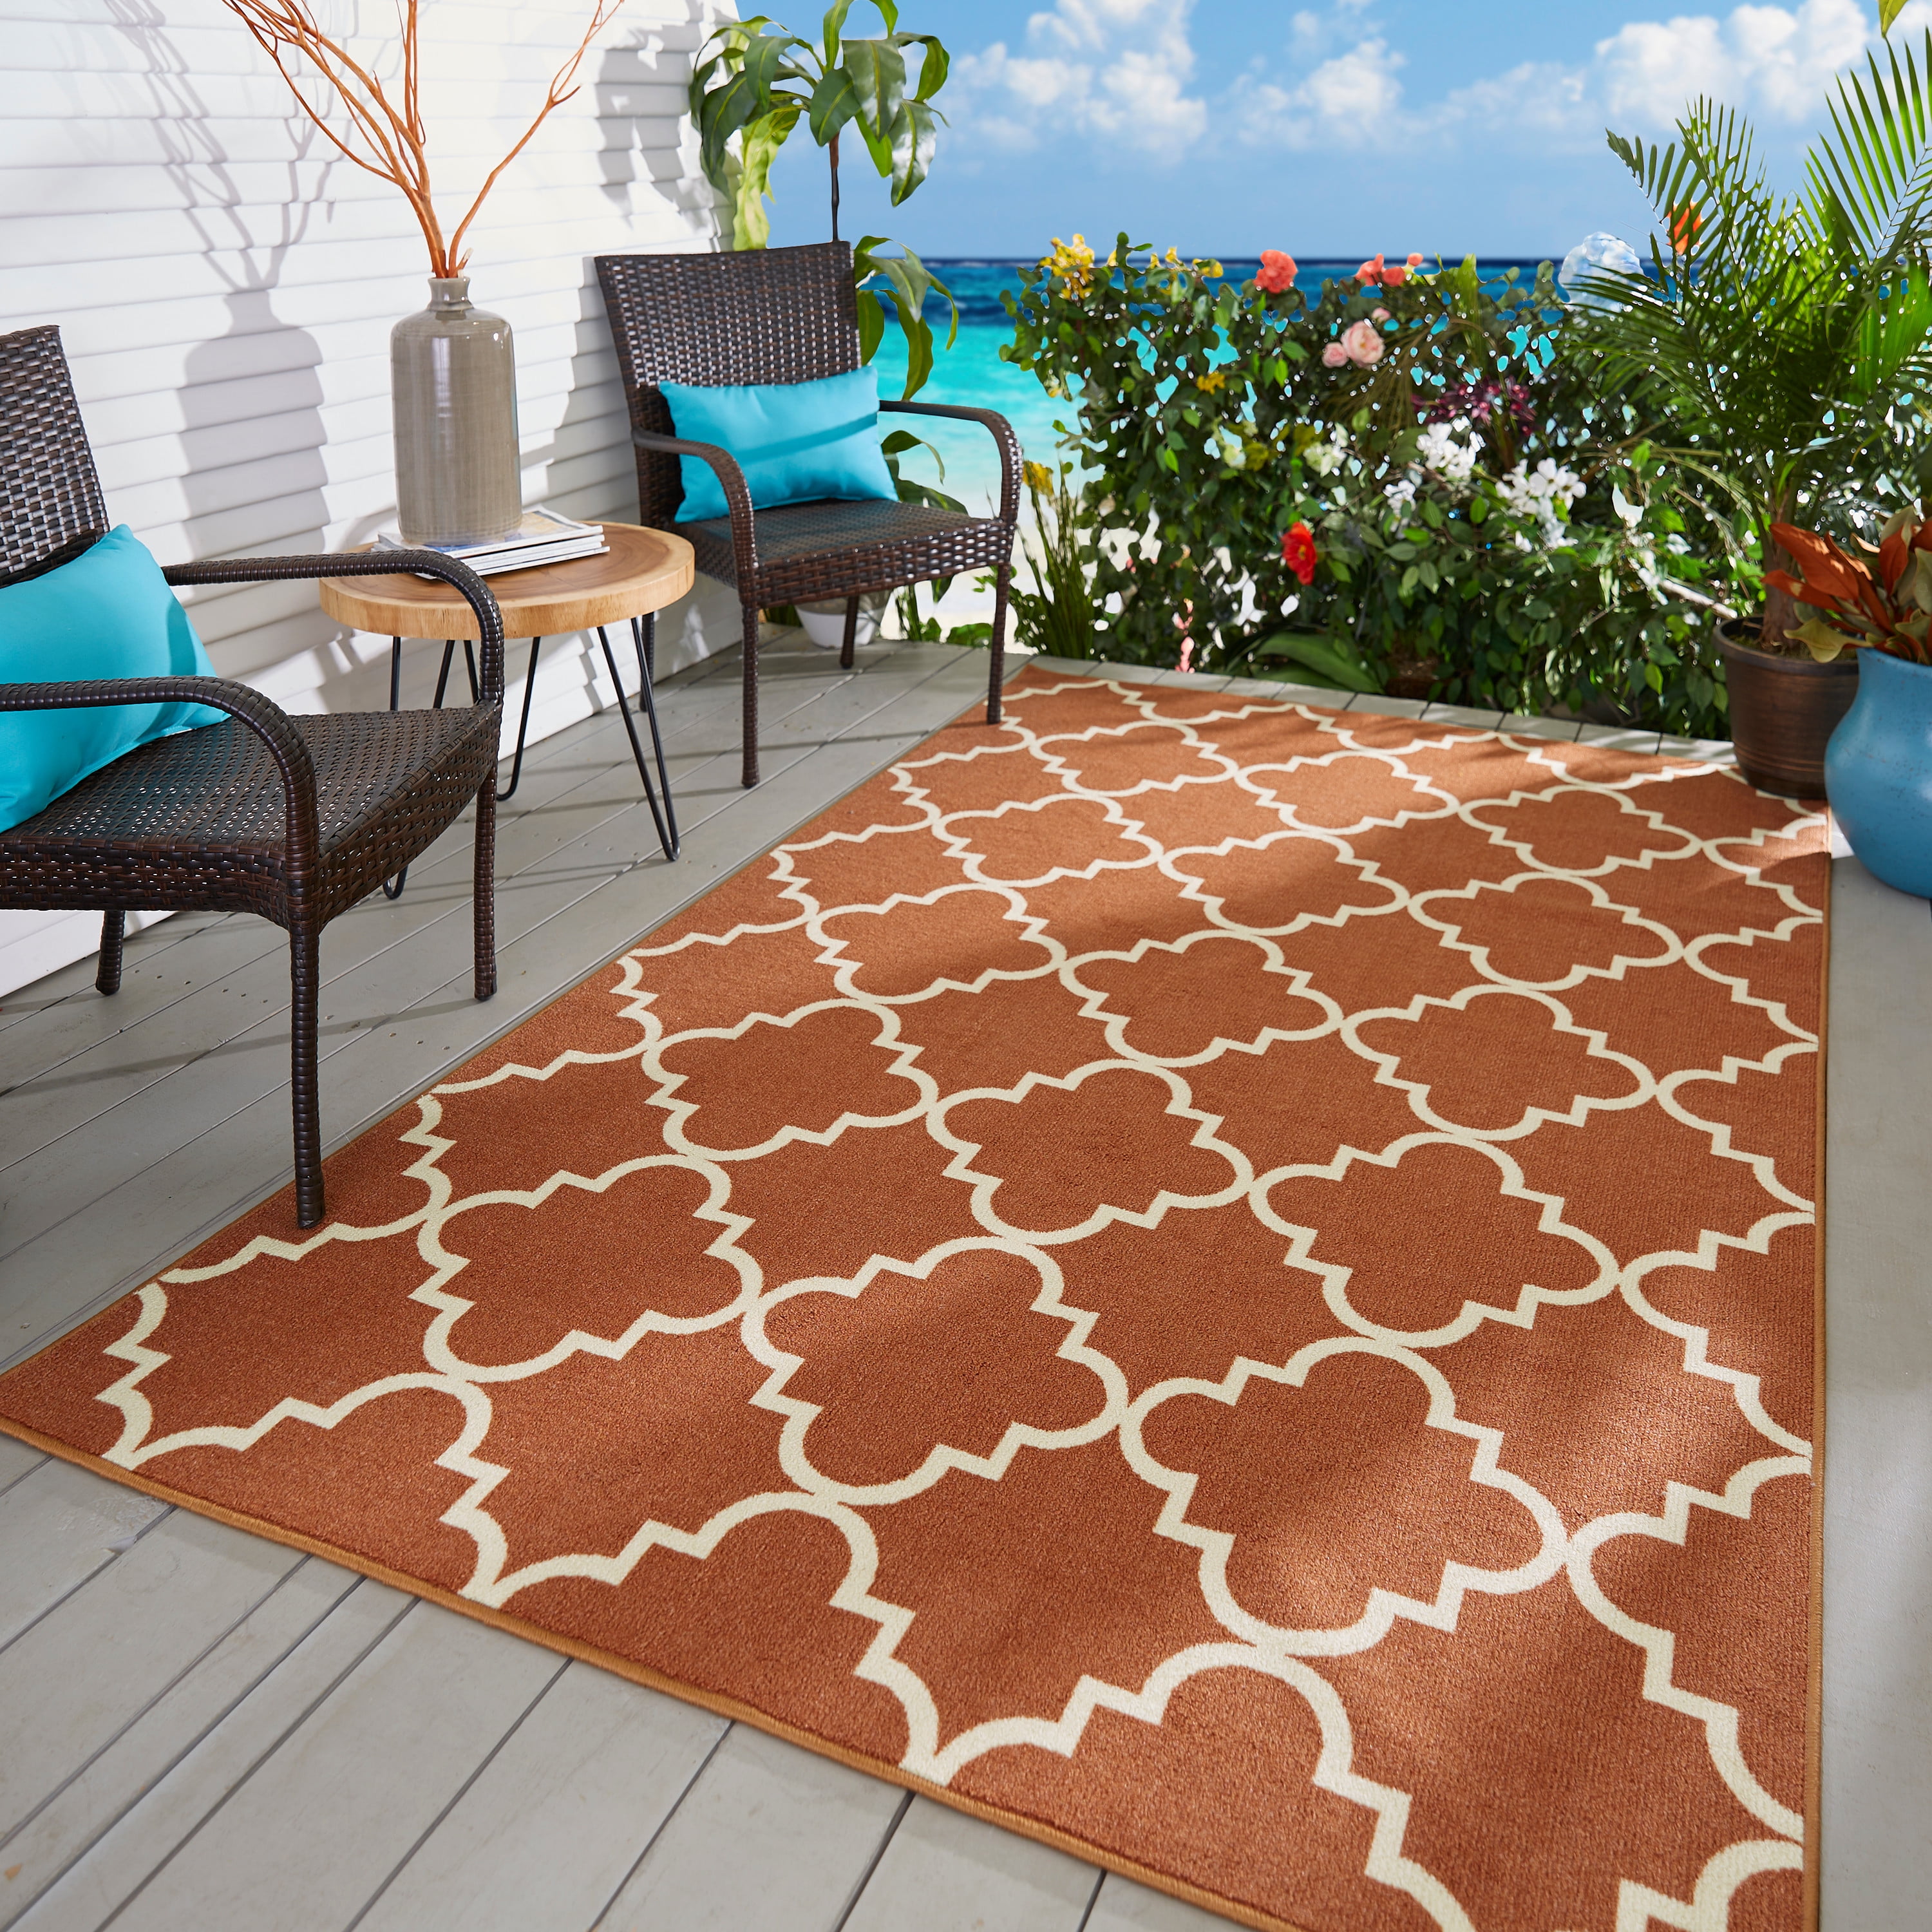 large outdoor rugs